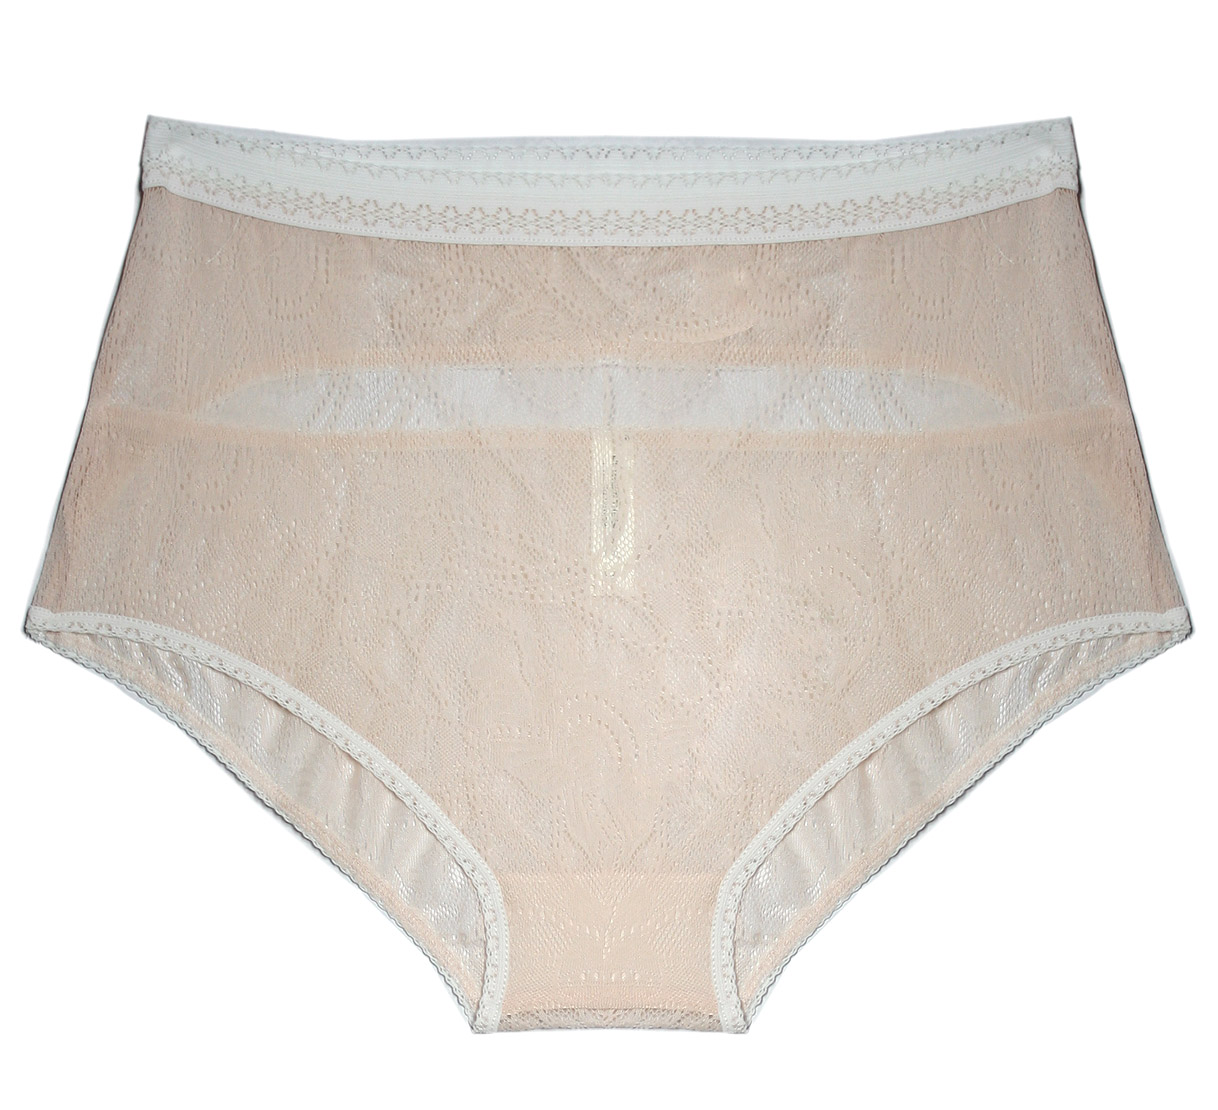 Petal Play Ouvert Hiwaist Knicker in Peony | Luxurious Peach Lace Lingerie | Between the Sheets Fine Intimates